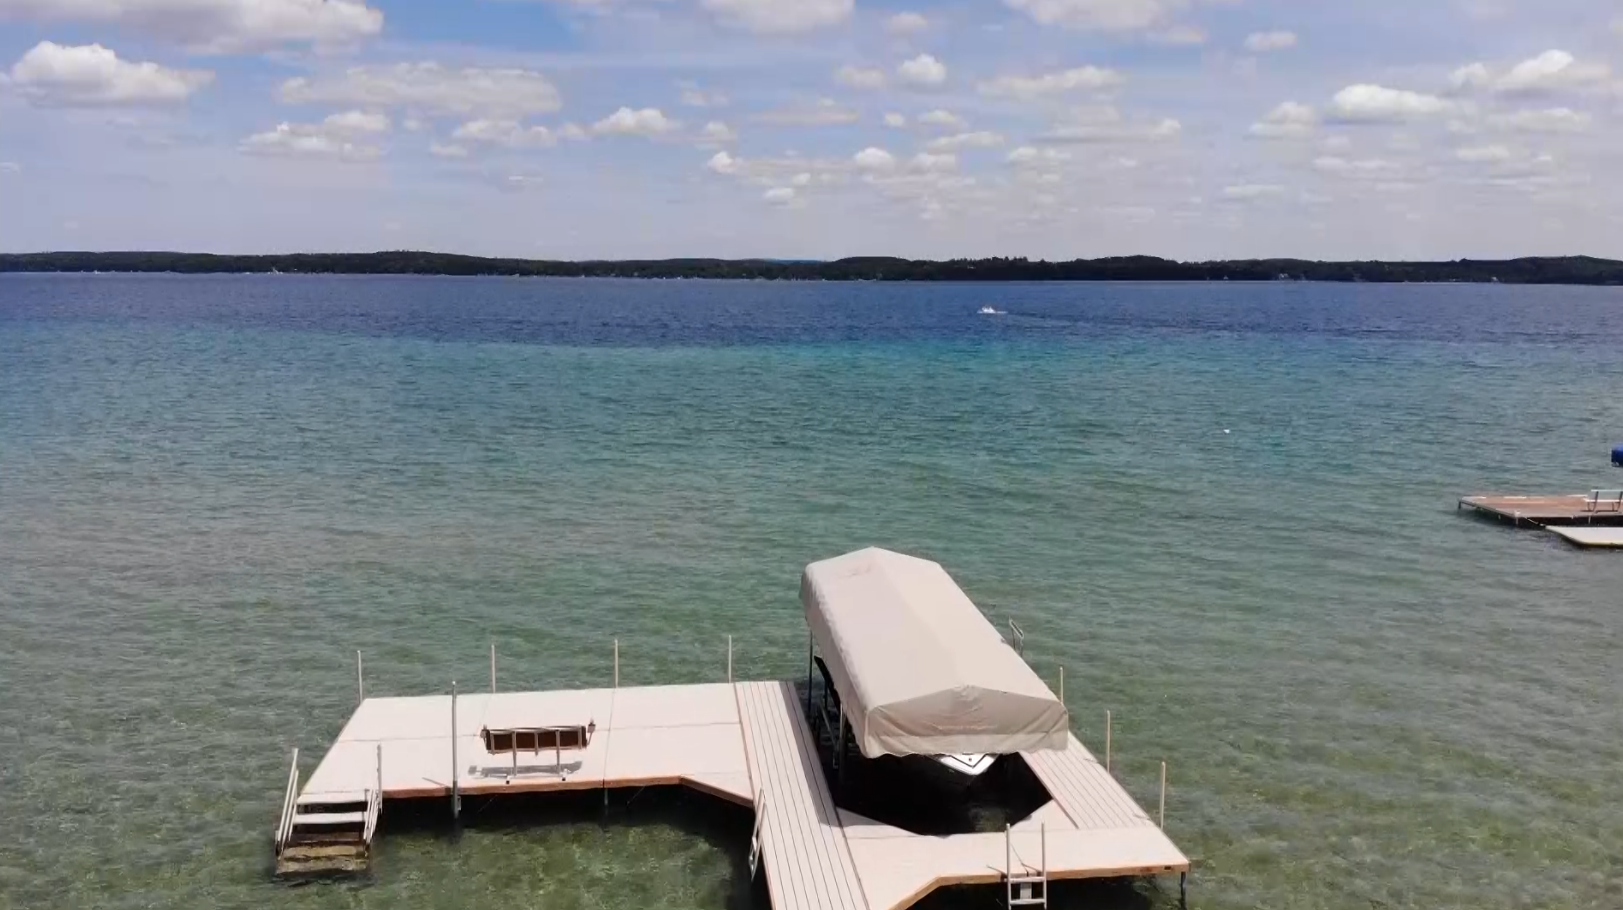 Amazing Northern Michigan Homes: French Point on Torch Lake